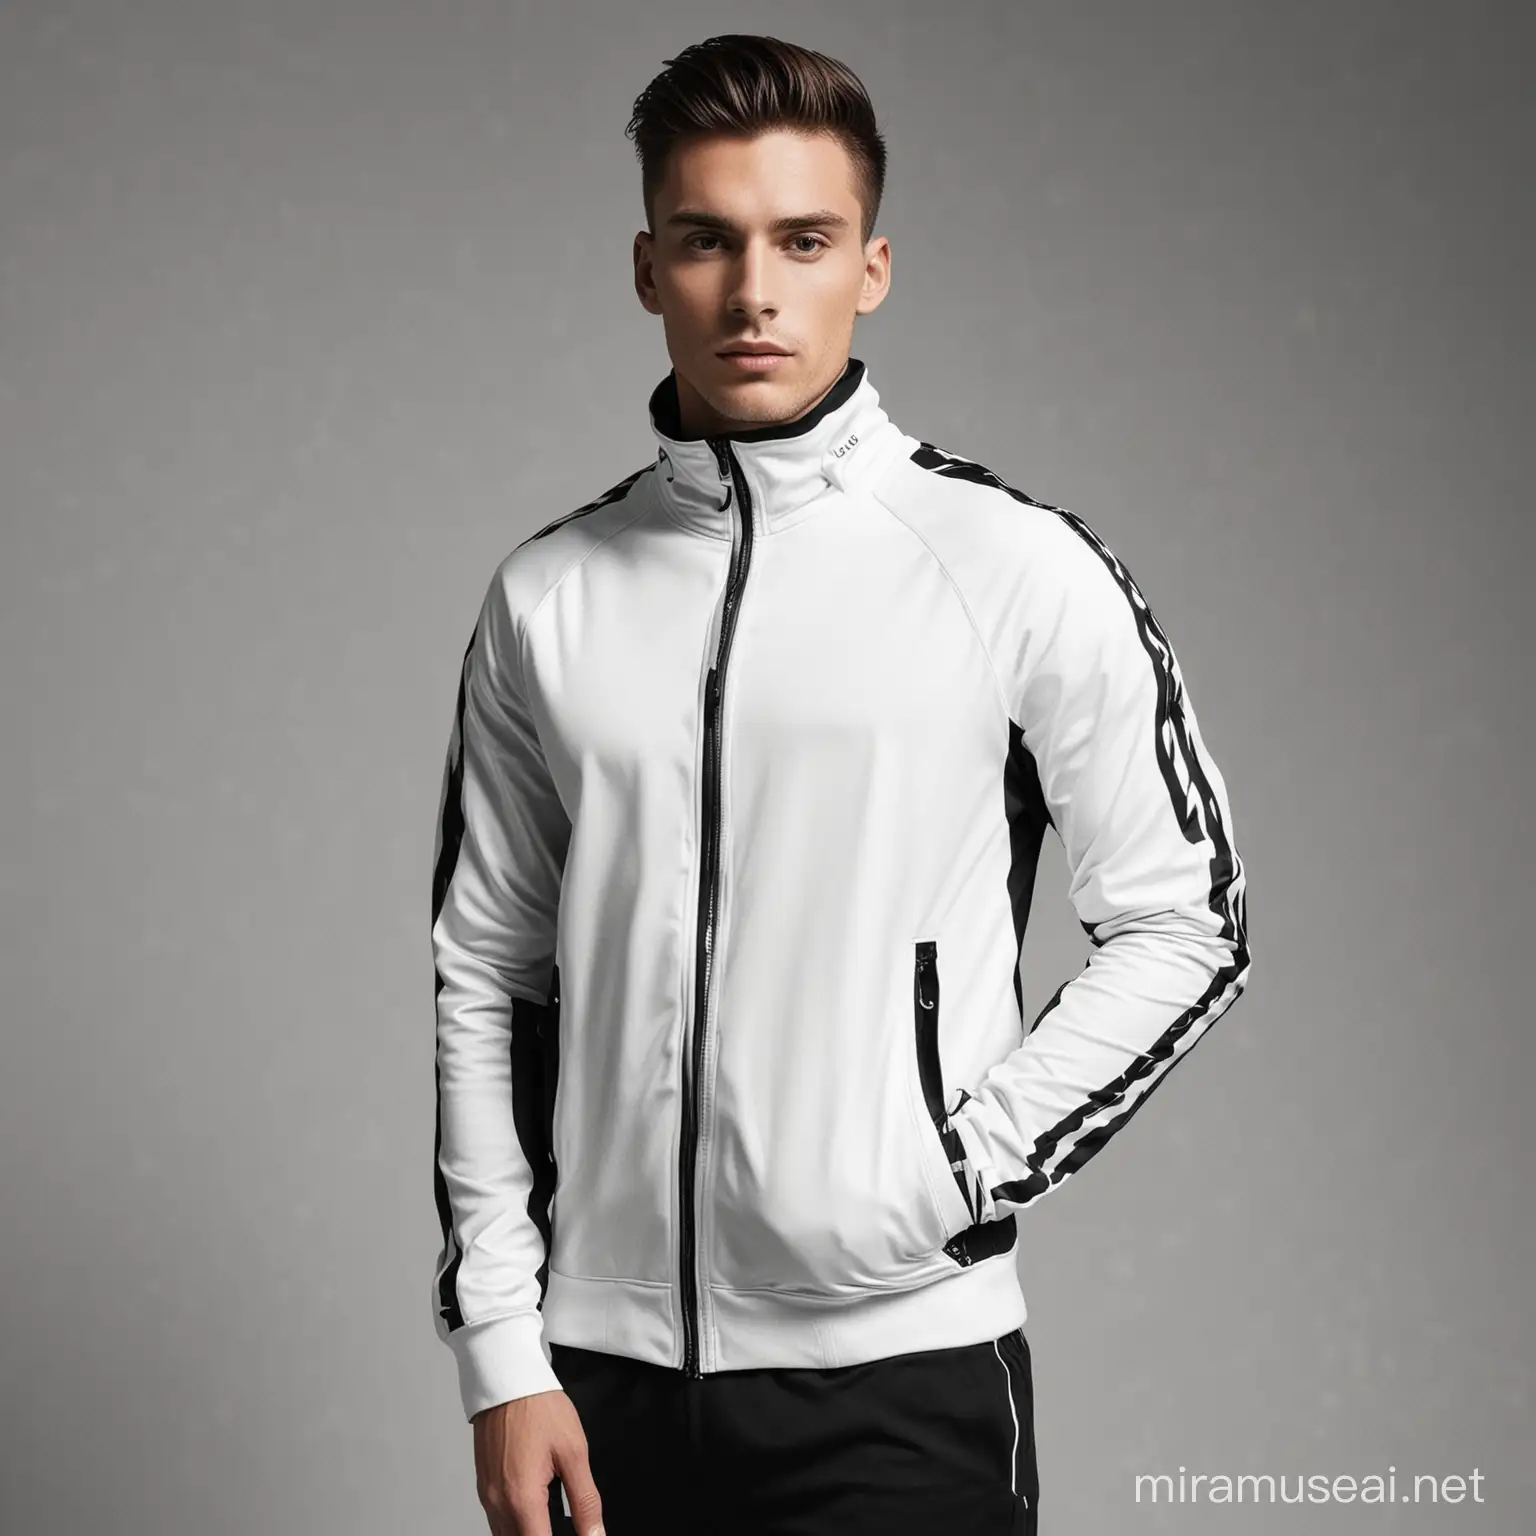 Black and White Turtle Neck Sports Jacket for Male Model